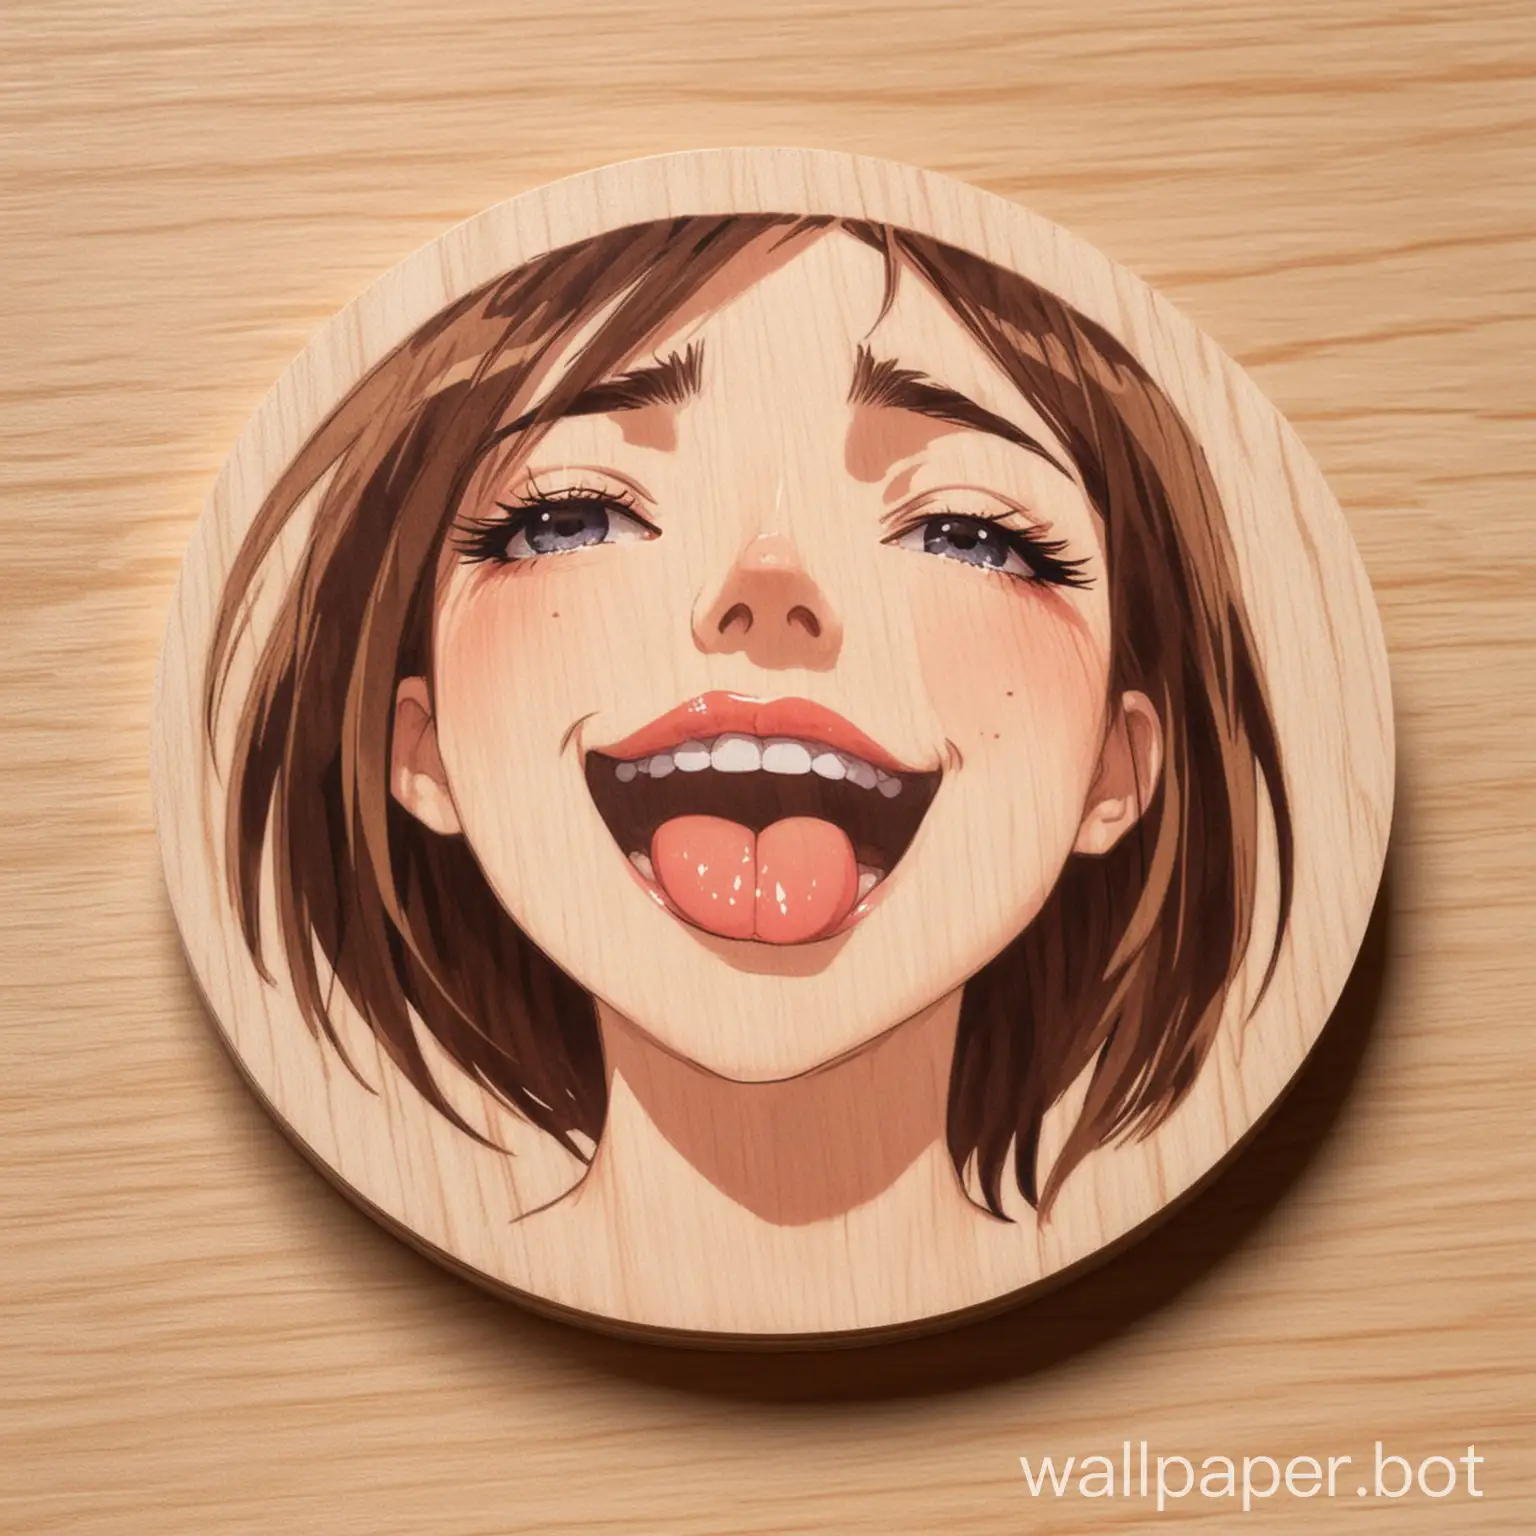 round plywood coaster, nsfw, anime sweaty and very shy woman showing small tongue, eyes half closed